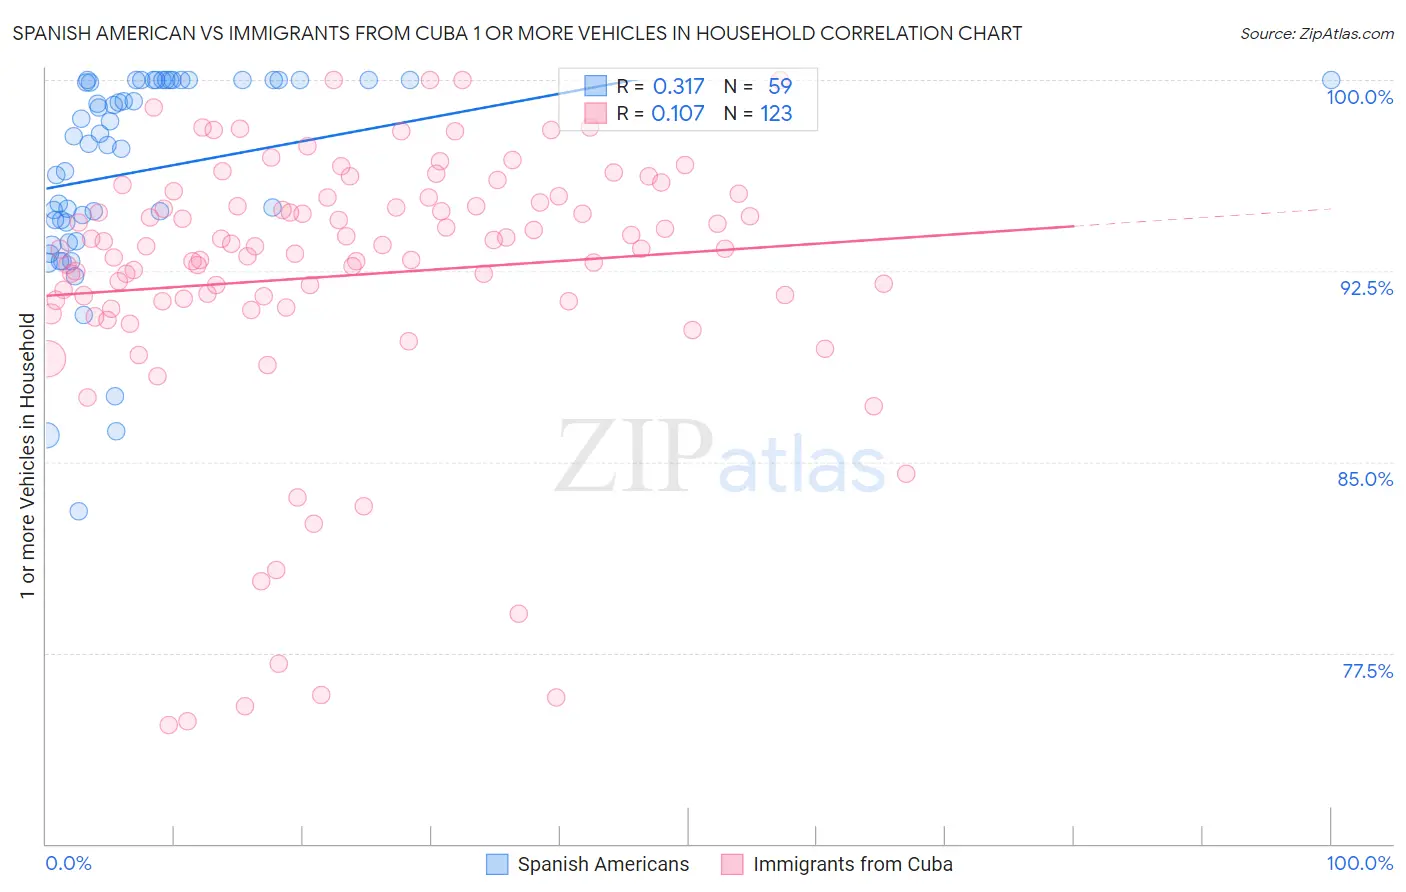 Spanish American vs Immigrants from Cuba 1 or more Vehicles in Household